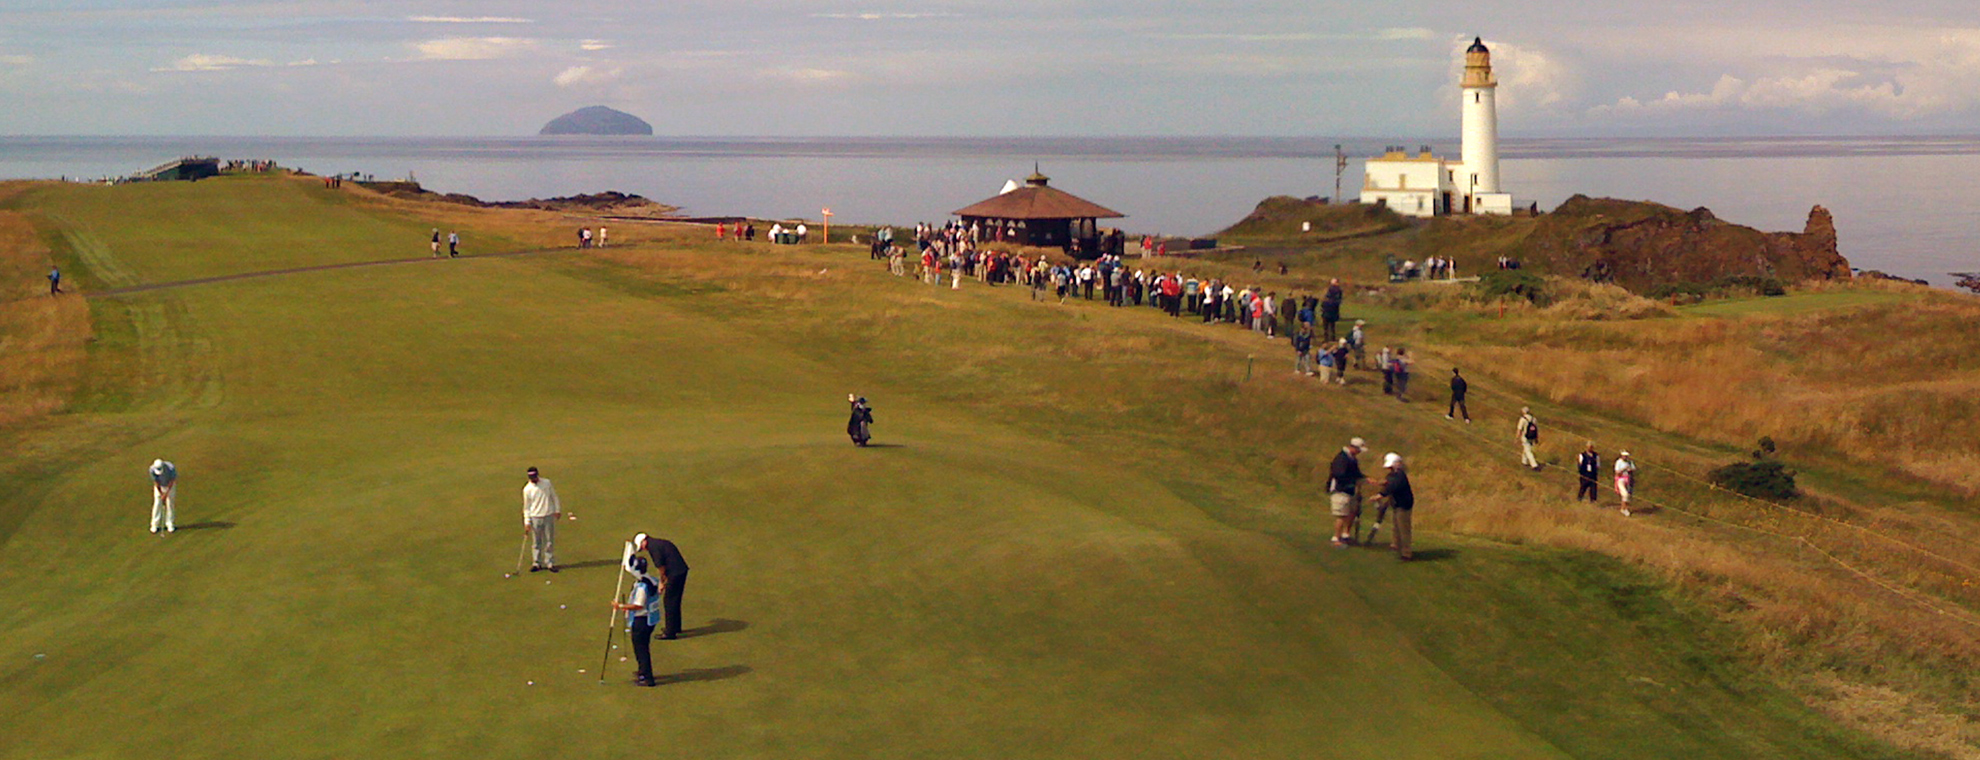 The 9th Green at 'The Open' at Turnberry